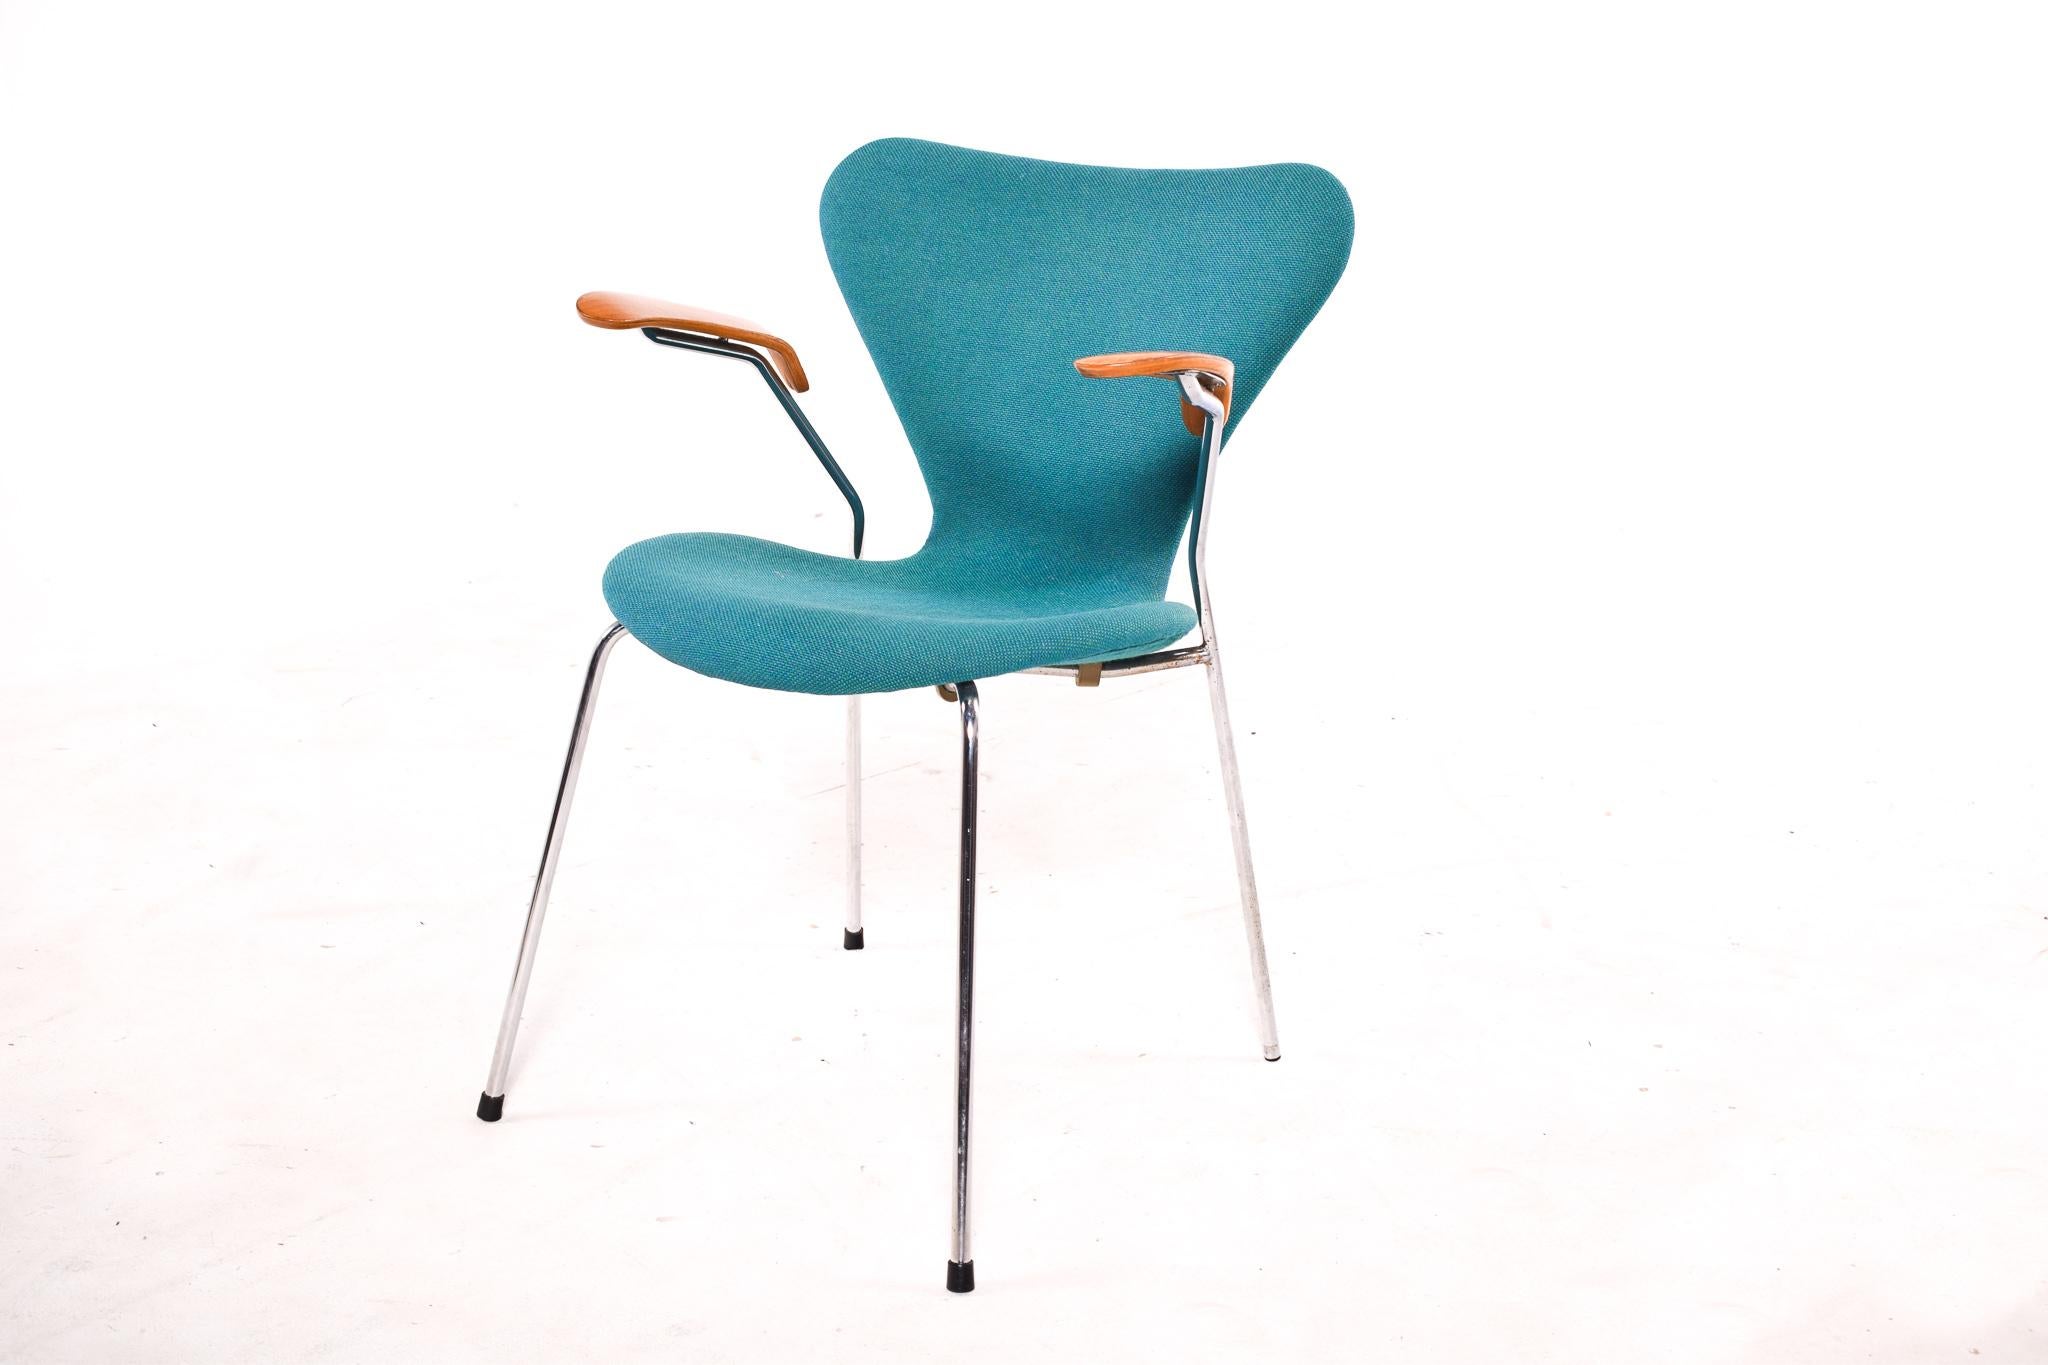 Famous series 7 armchair, Arne Jacobsen design, with turquoise upholstery in fabric, produced by Fritz Hansen. Metal structure, seat and back are made of molded plywood. The armrests is in plywood. It's signed underside of the seat.